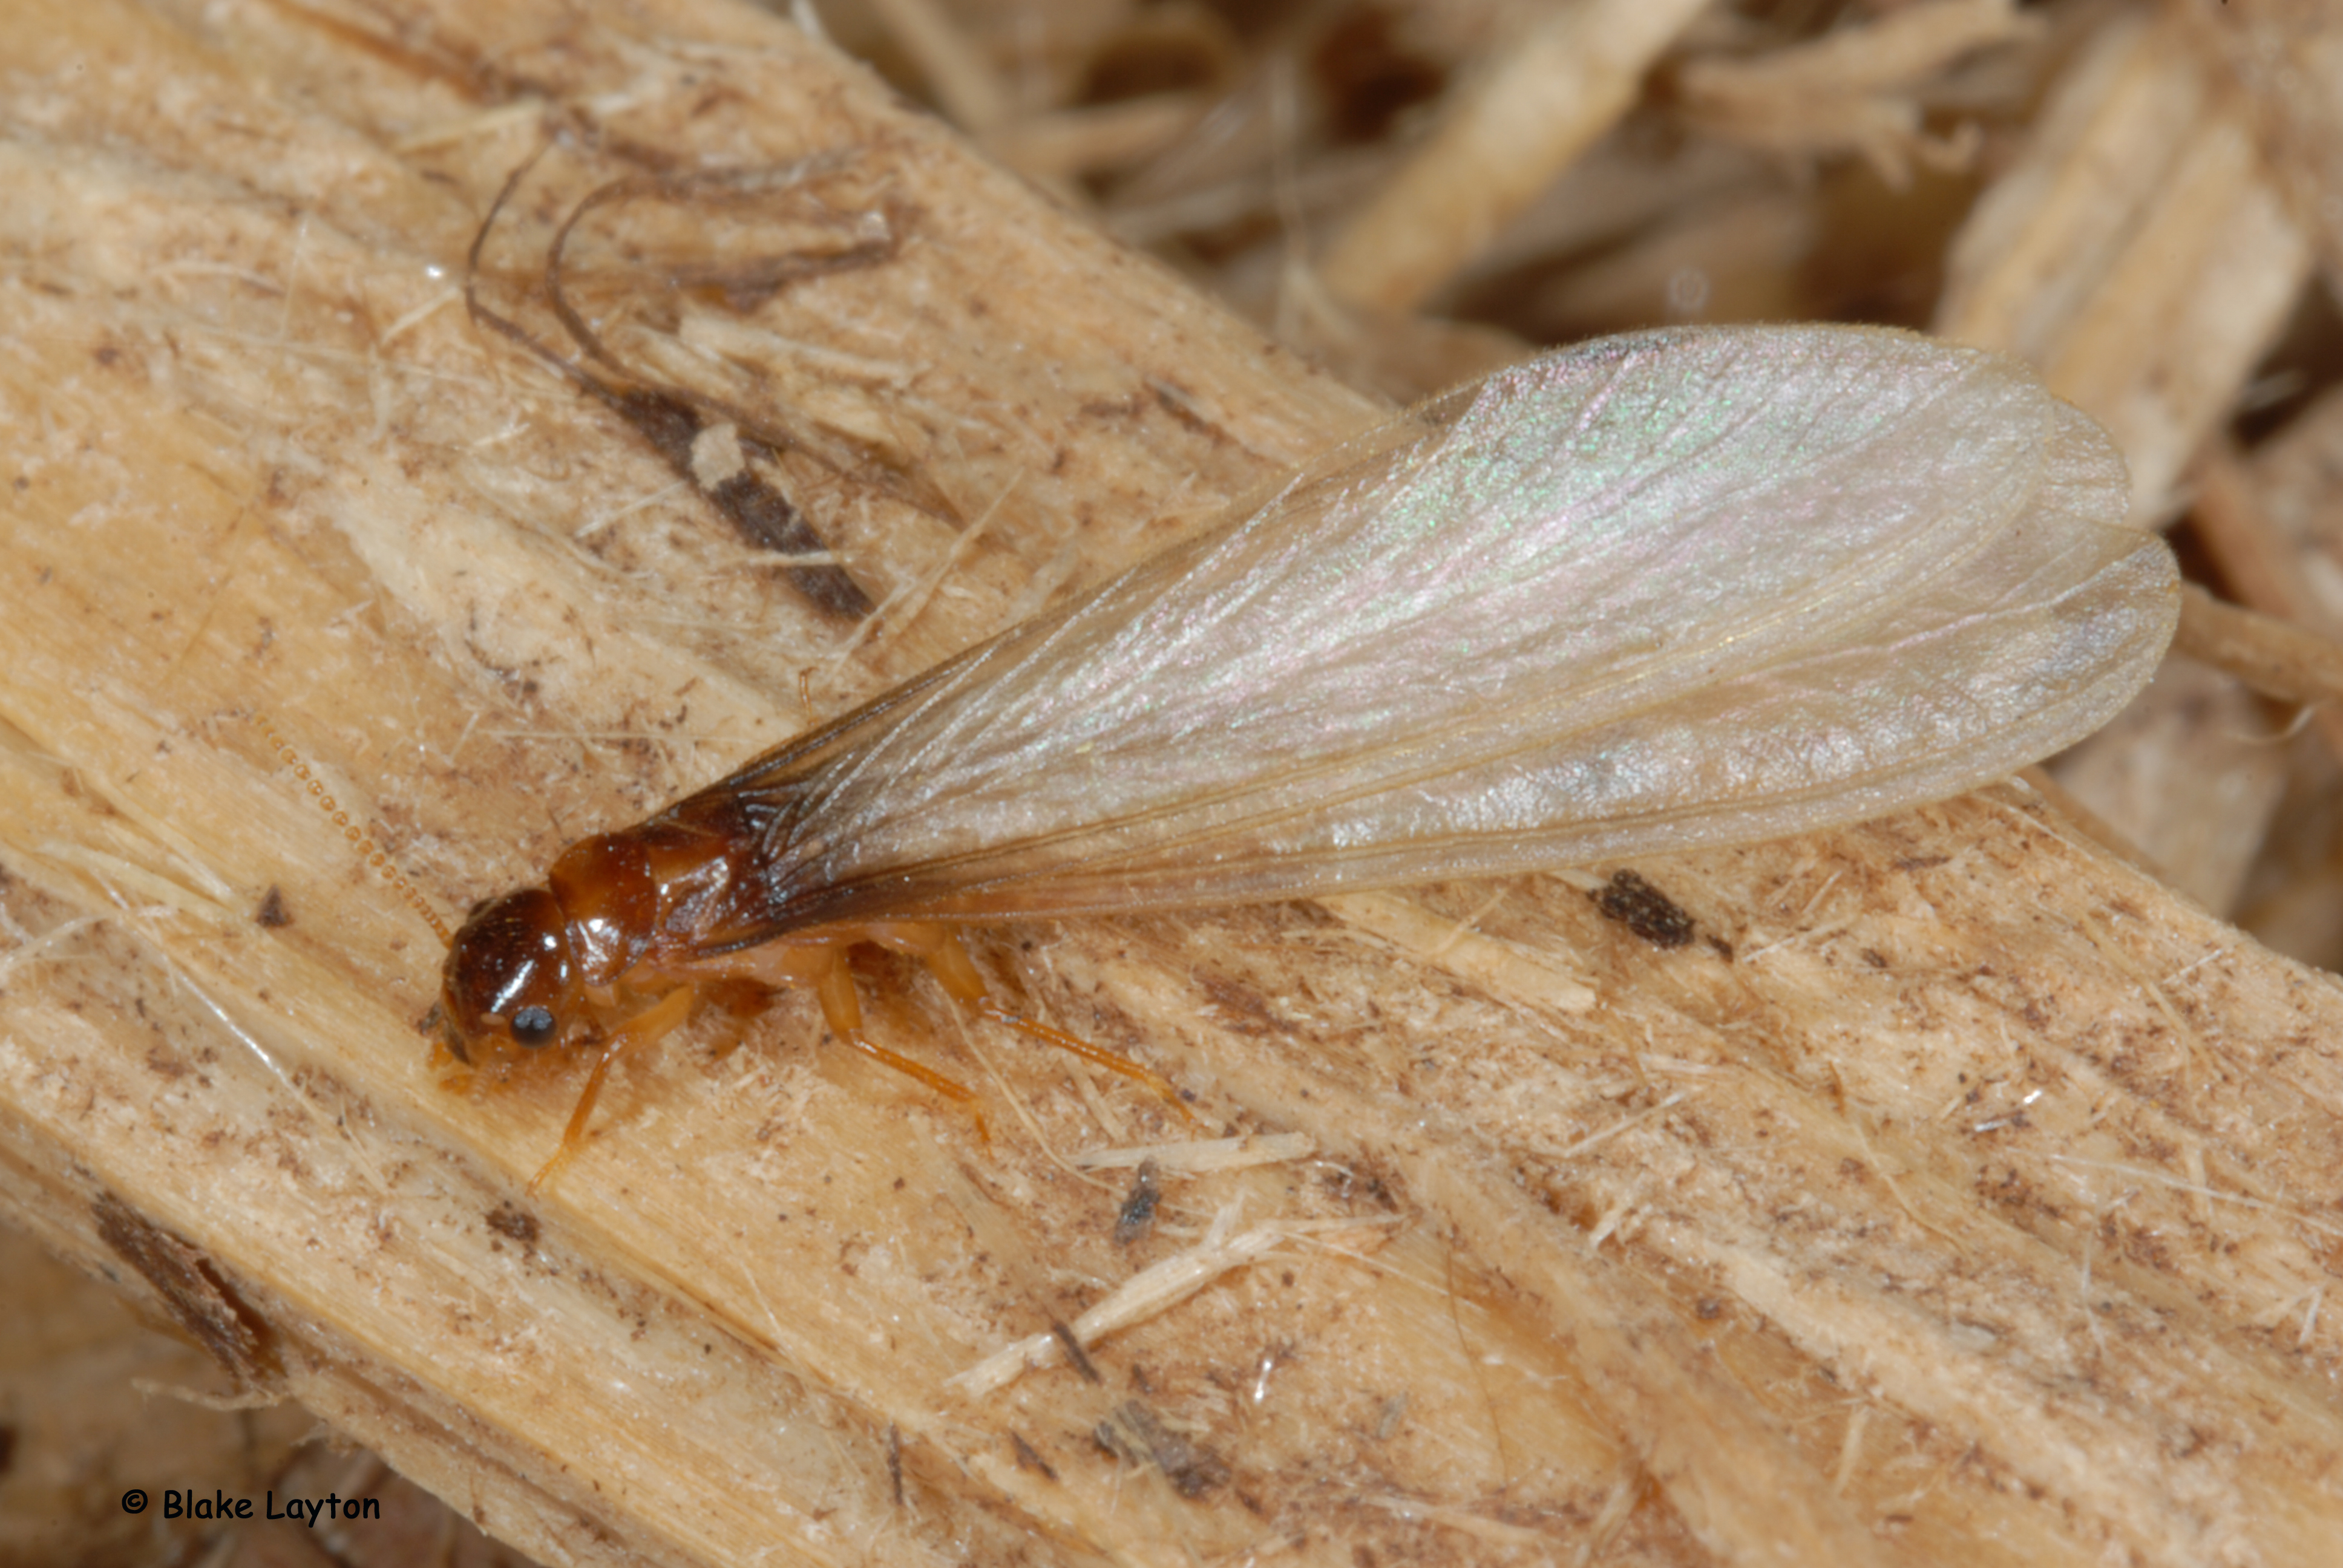 Formosan subterranean termite swarmer.  Note all four wings are equal in length.